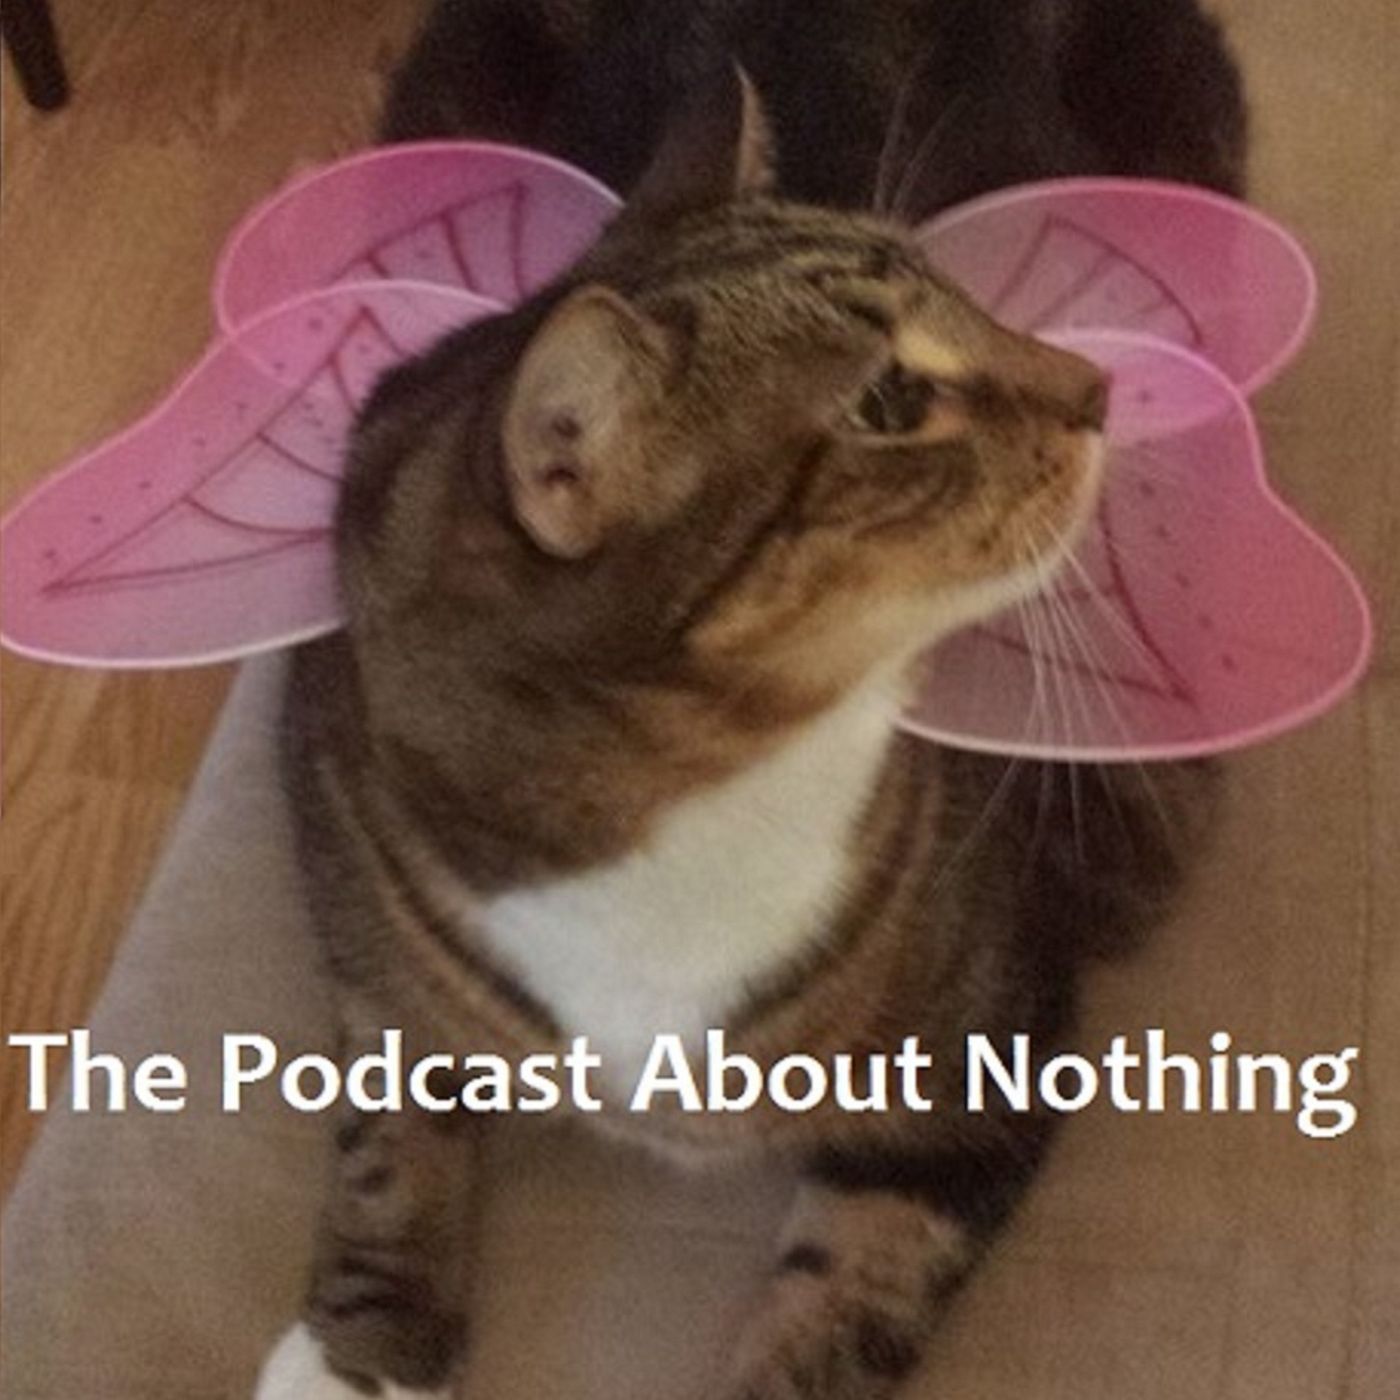 The Podcast About Nothing